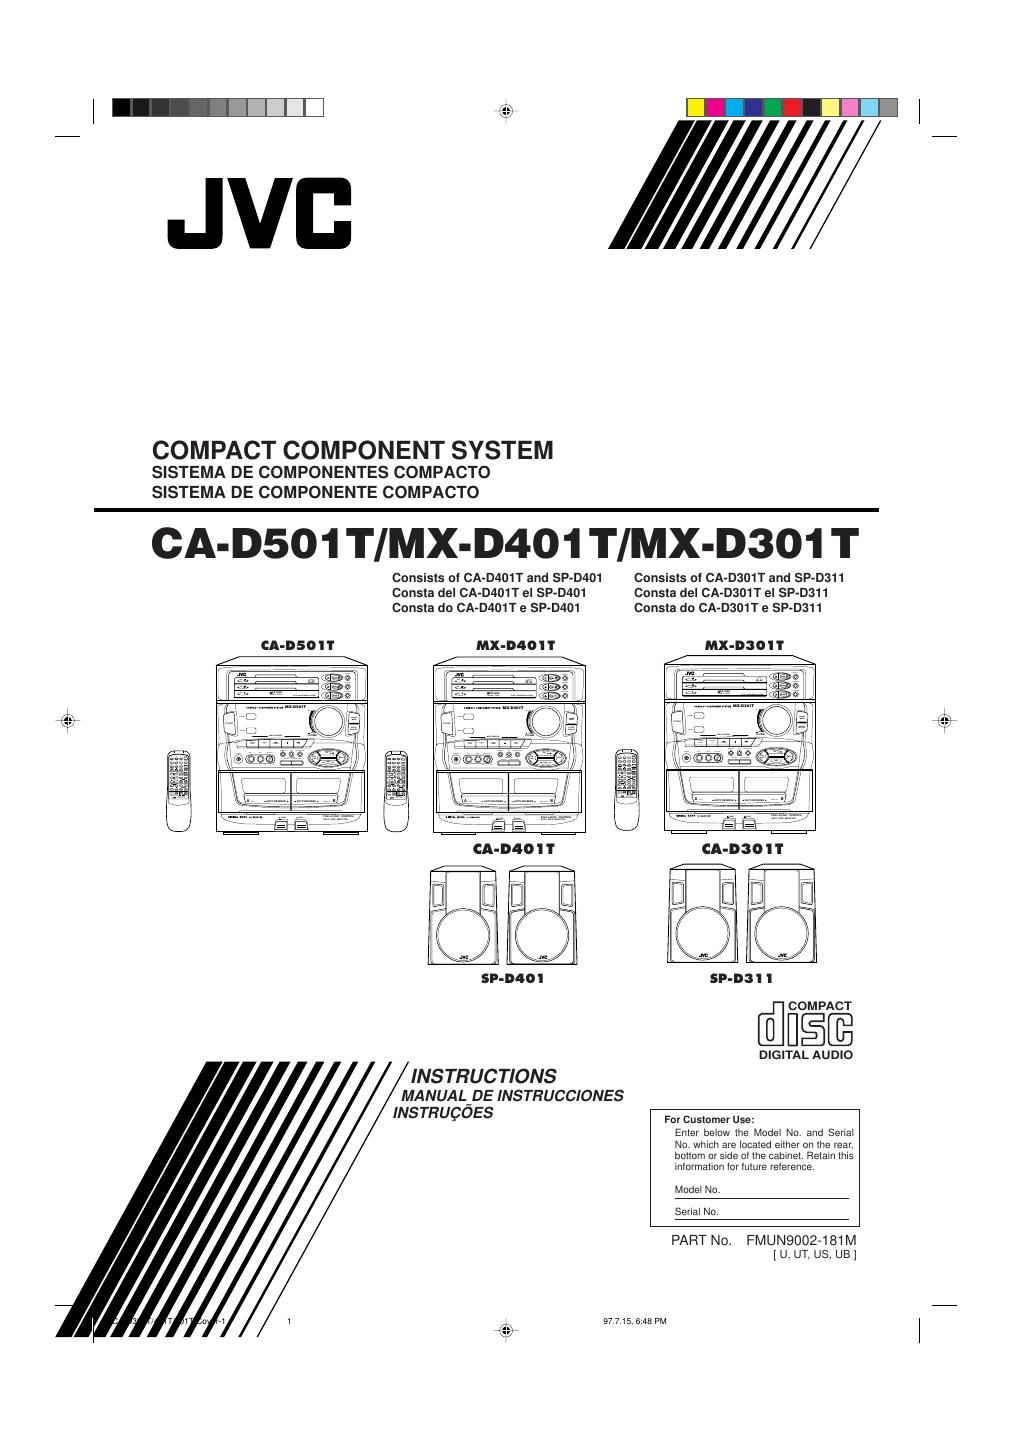 Jvc CAD 301 T Owners Manual